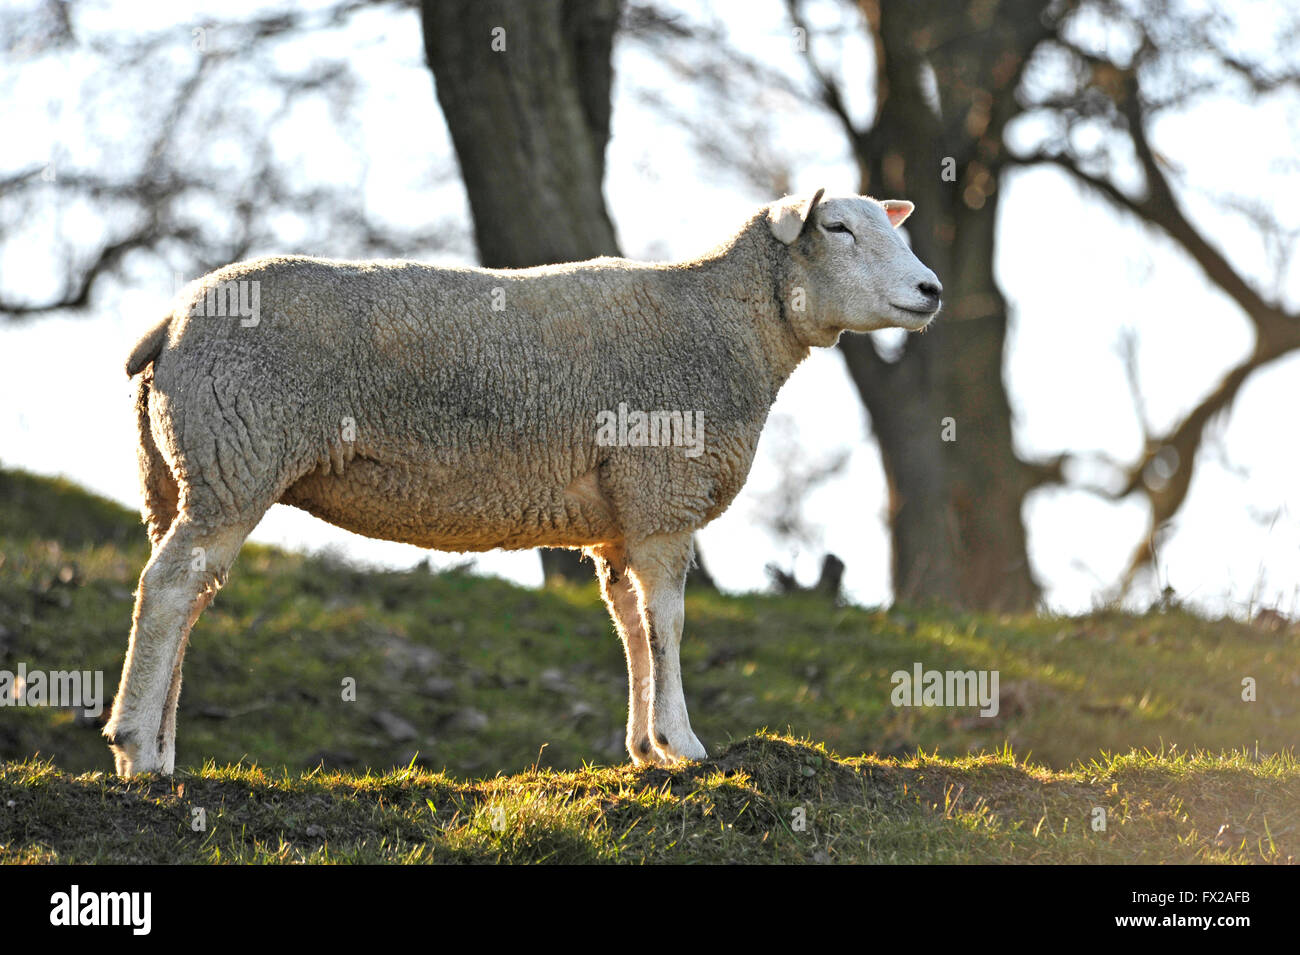 Domestic Sheep standing in its natural habitat Stock Photo